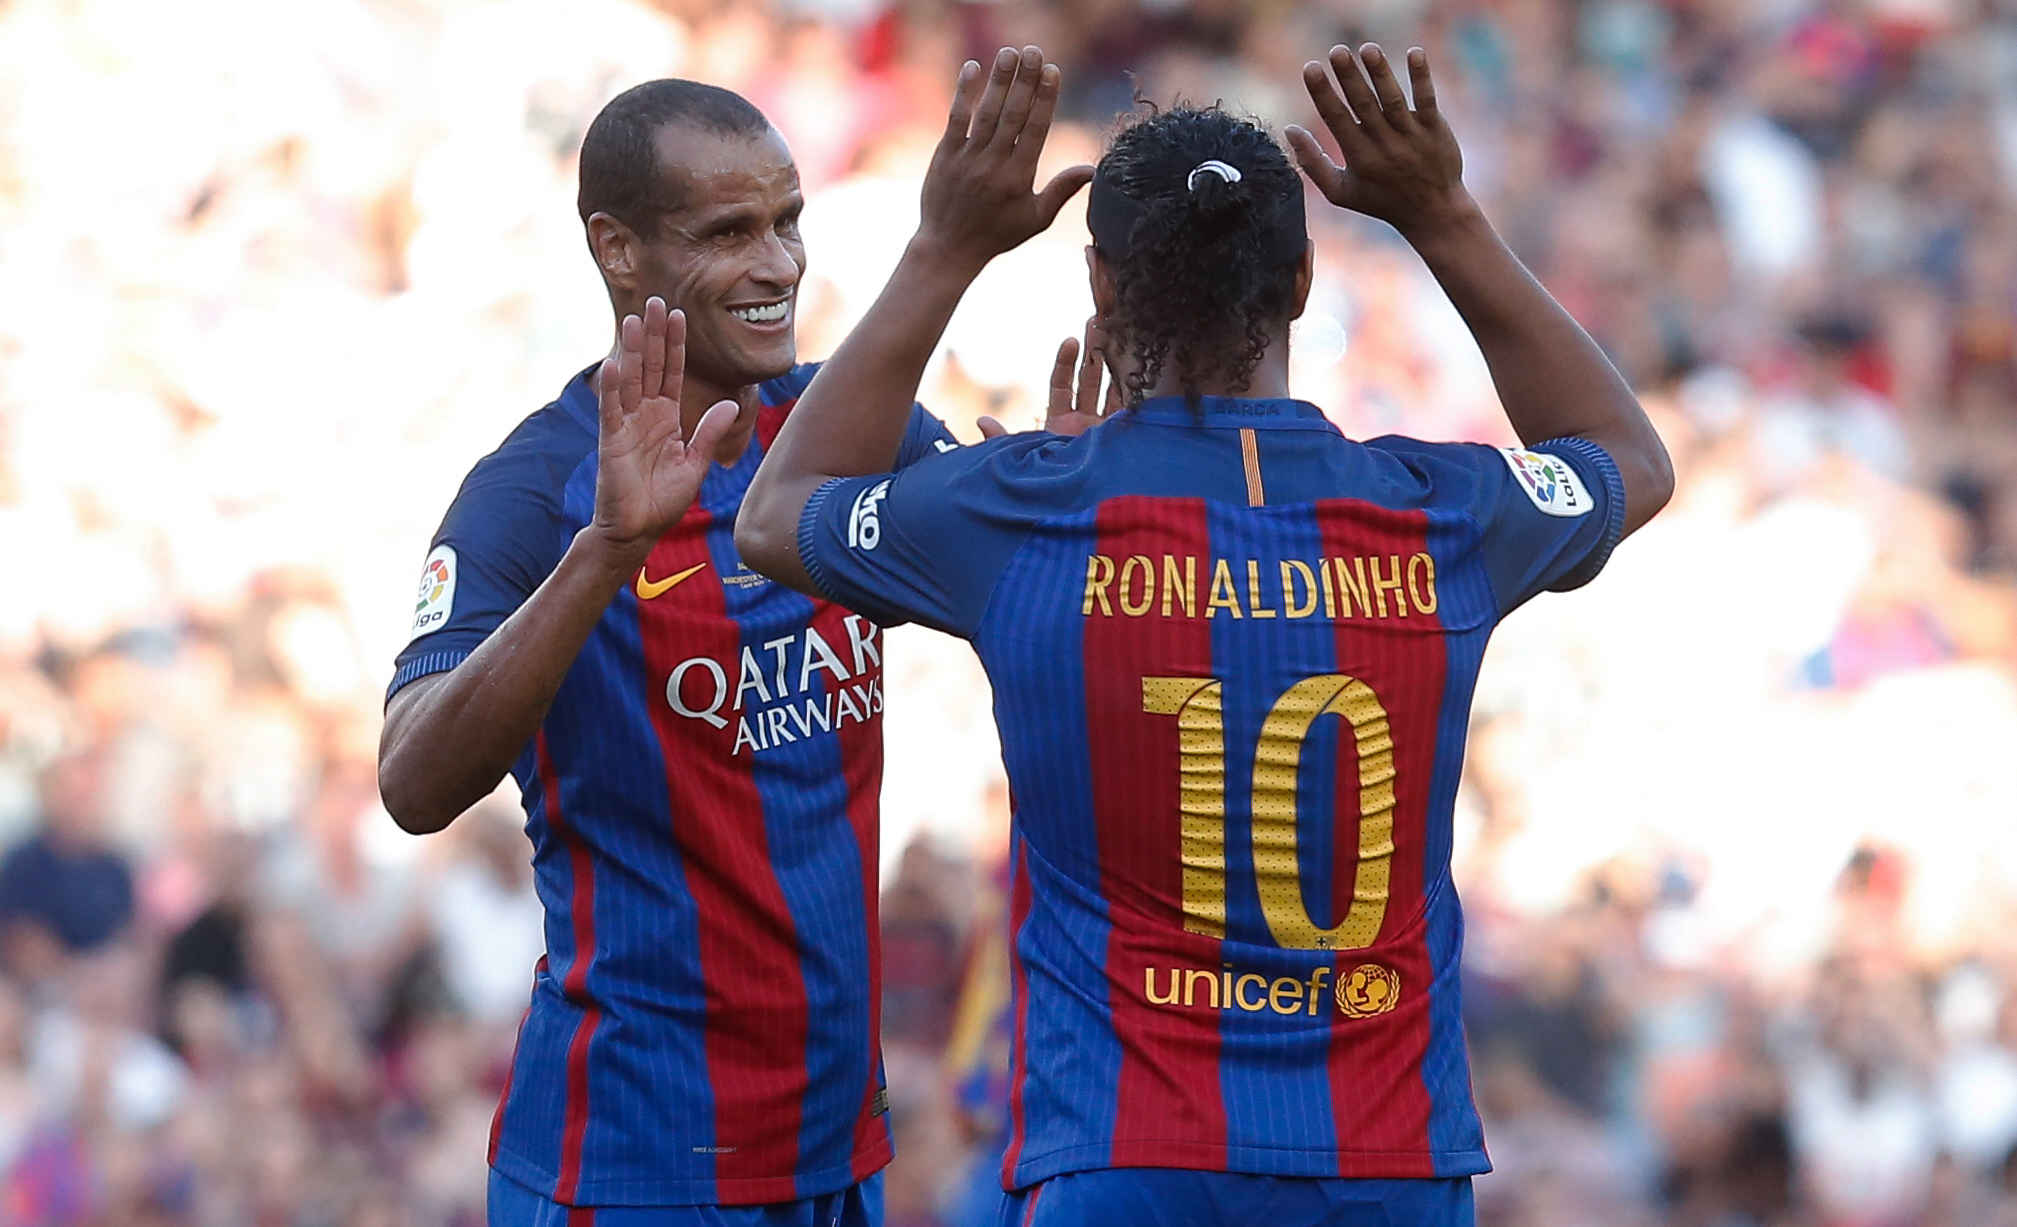 Former Barcelona's Brazilian forward Ronaldinho (R) and former Barcelona's Brazilian midfielder Rivaldo celebrate during a charity football match between Barcelona Legends vs Manchester United Legends at the Camp Nou stadium in Barcelona on June 30, 2017.